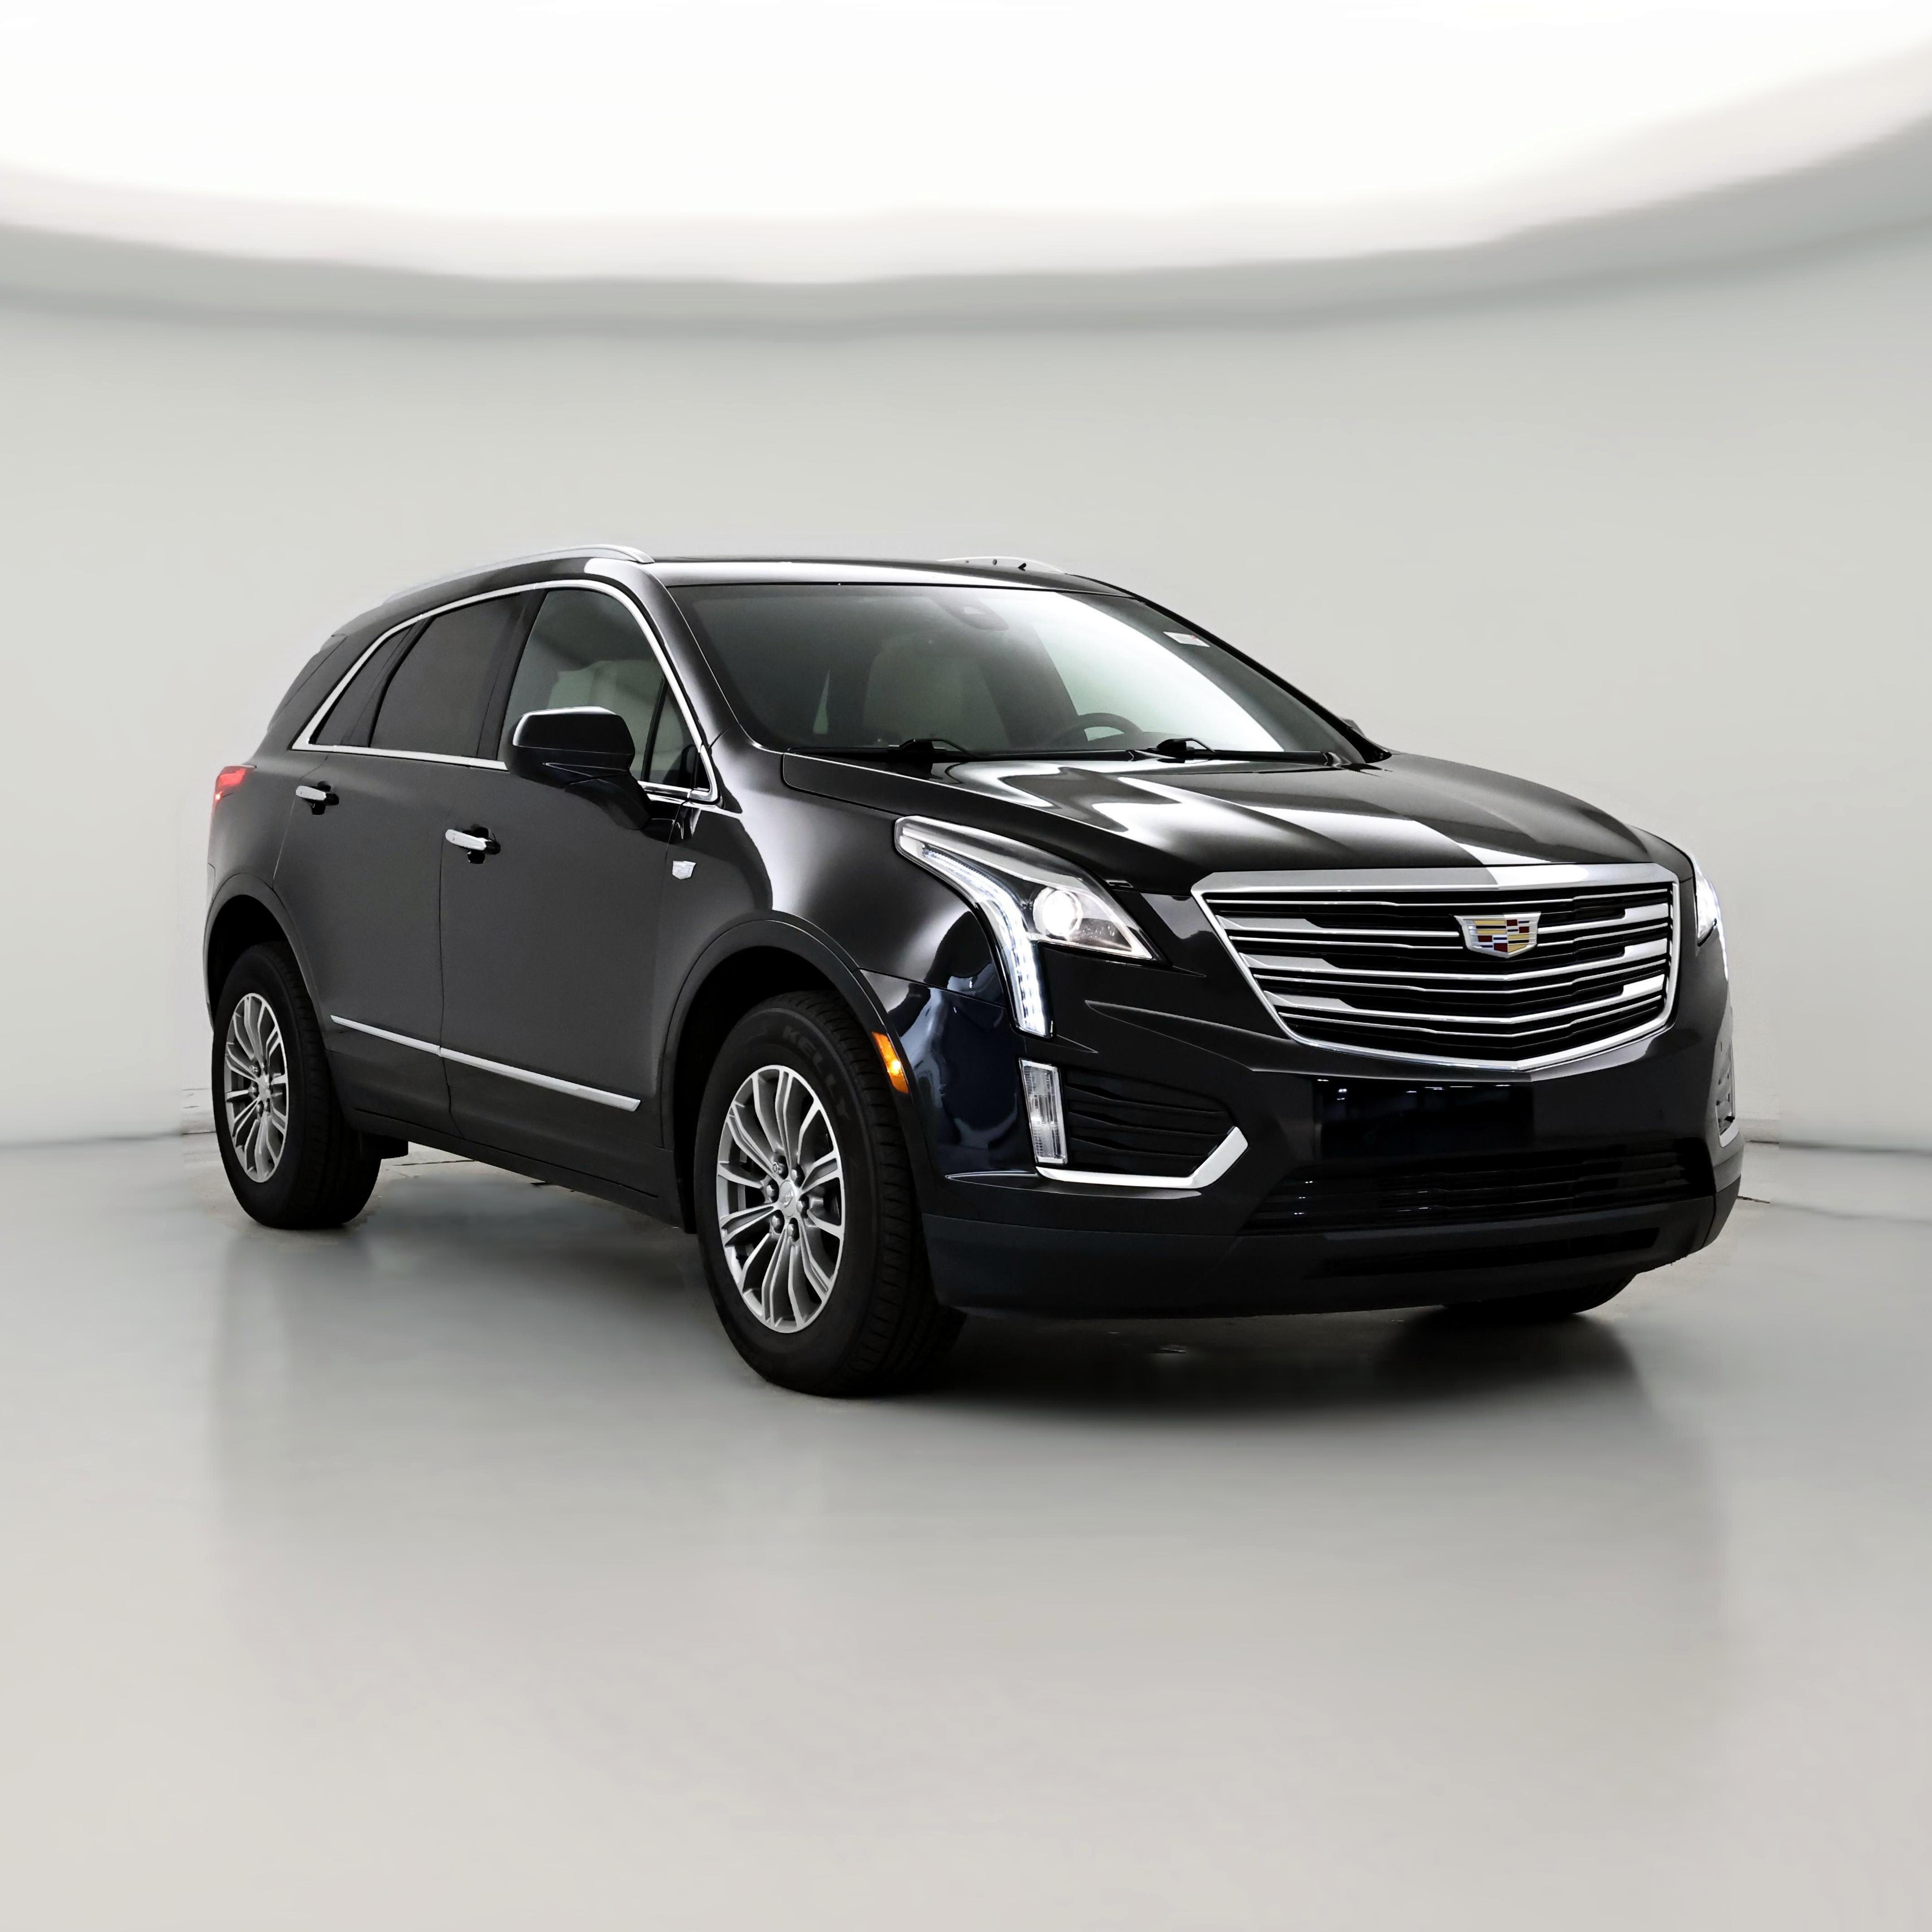 Used 2019 Cadillac XT5 for Sale